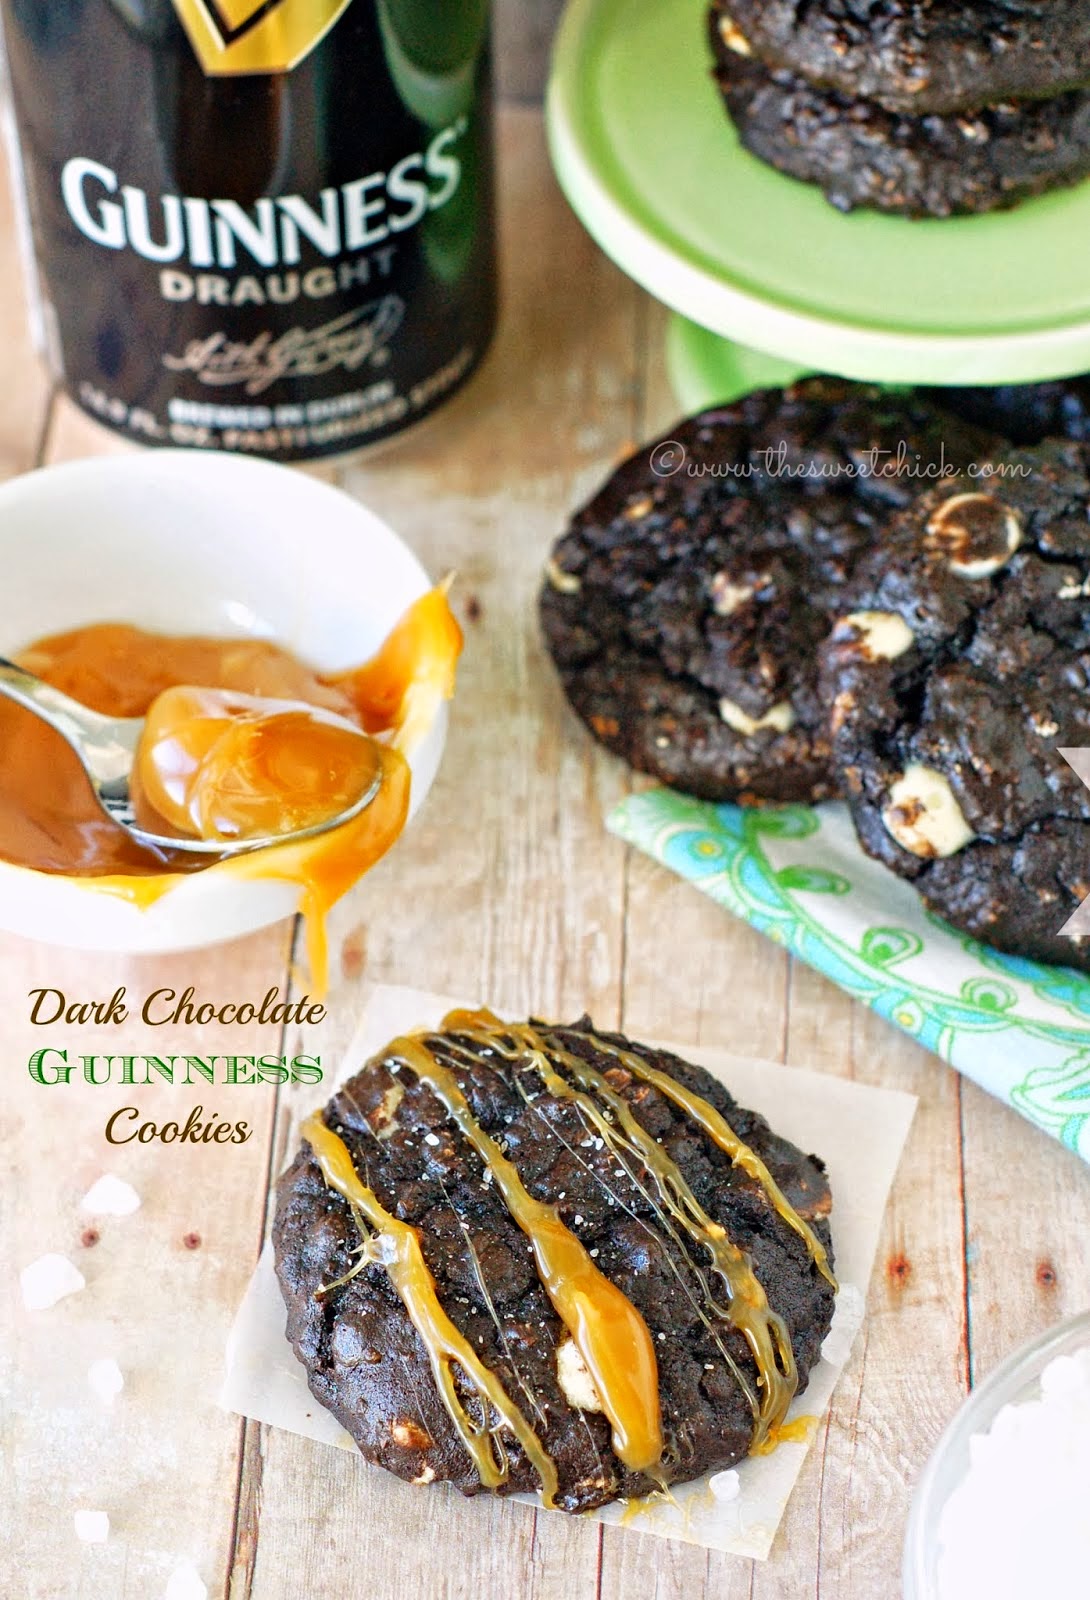 Dark Chocolate Guinness Cookies by The Sweet Chick